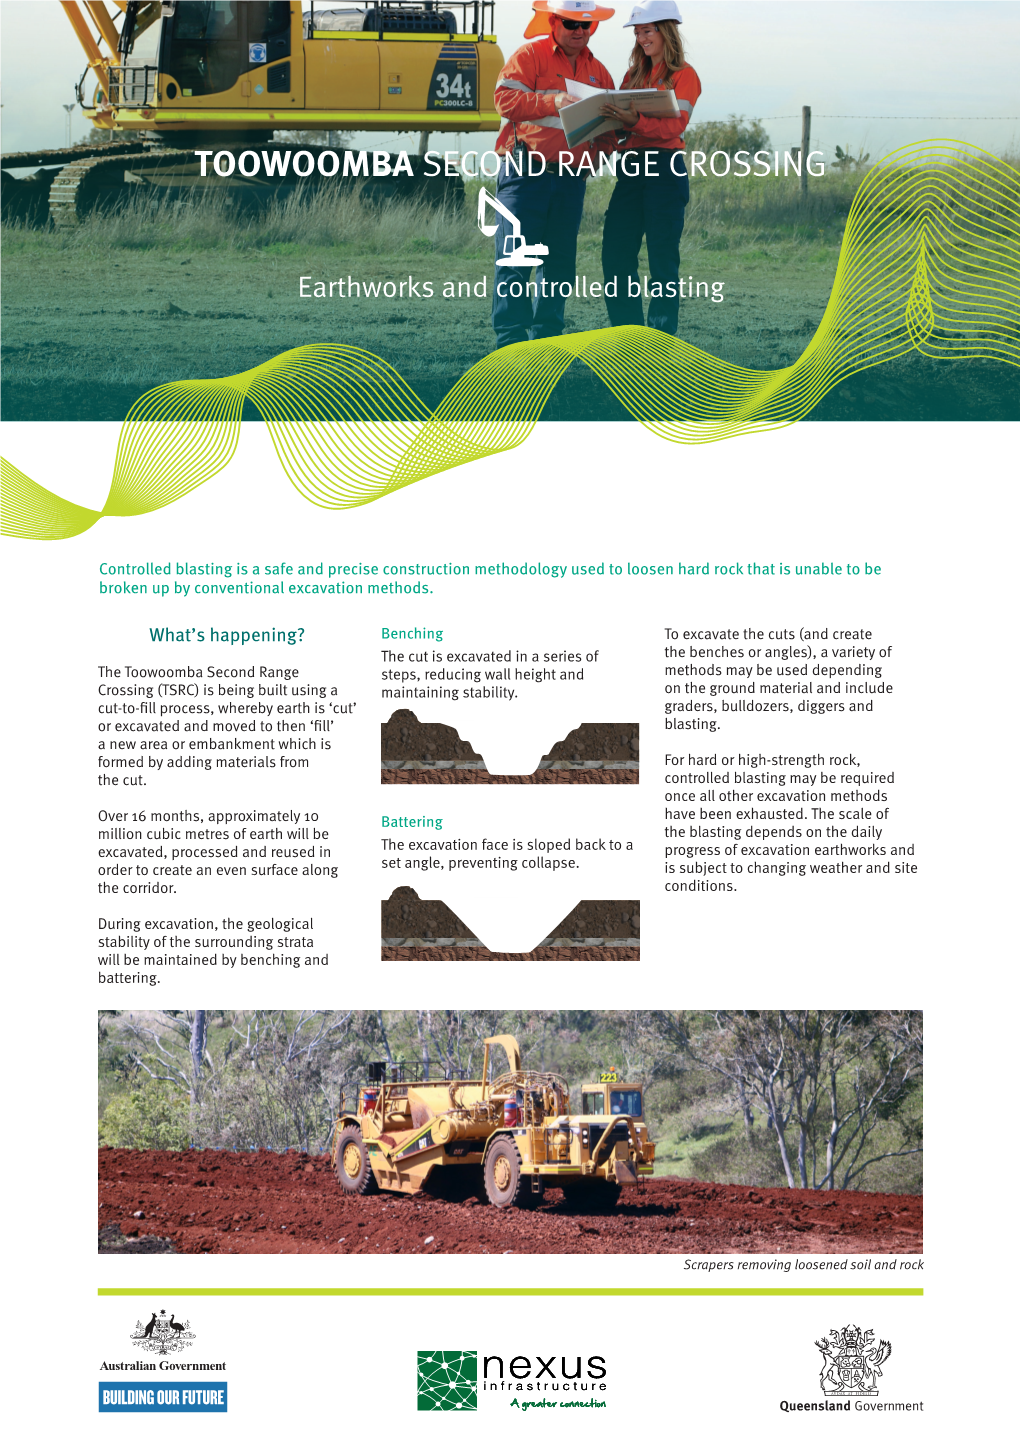 Earthworks and Controlled Blasting